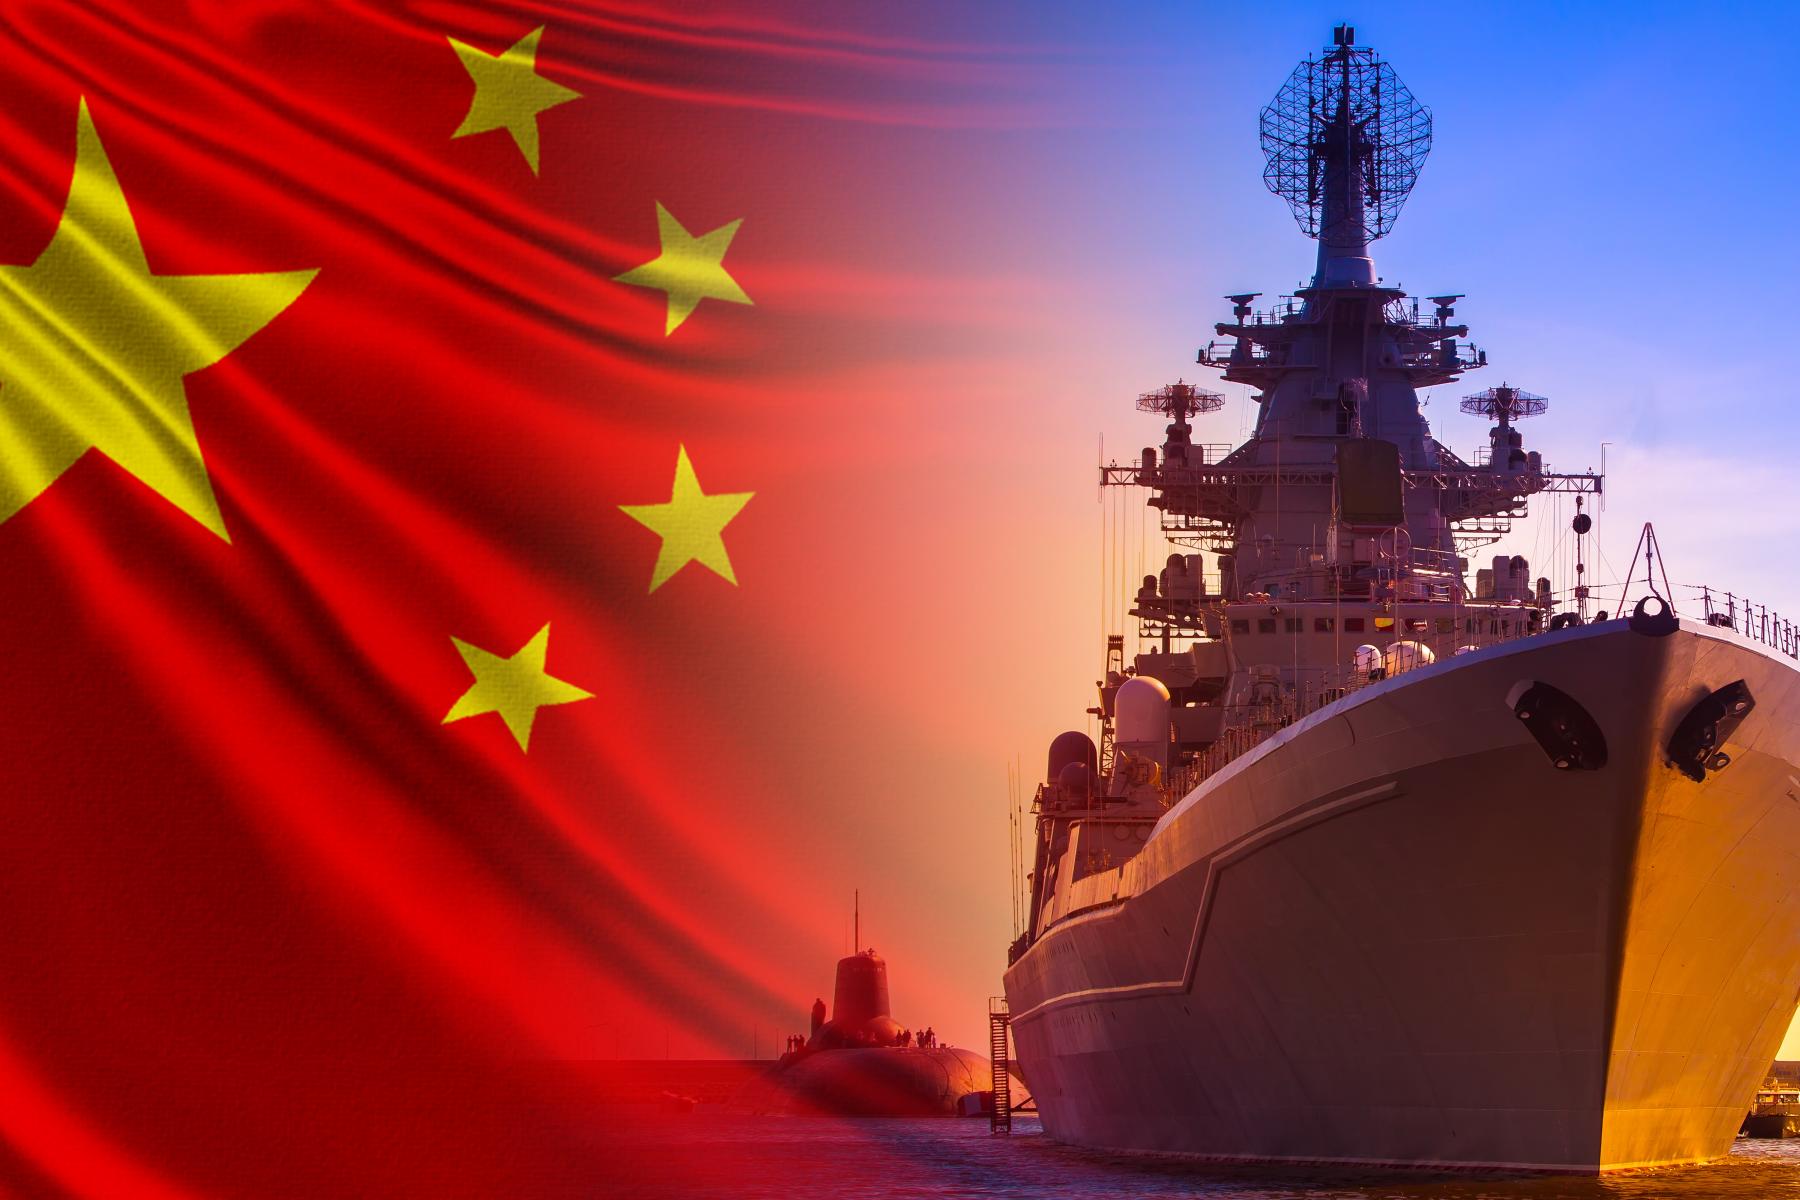 Chinese flag and warship